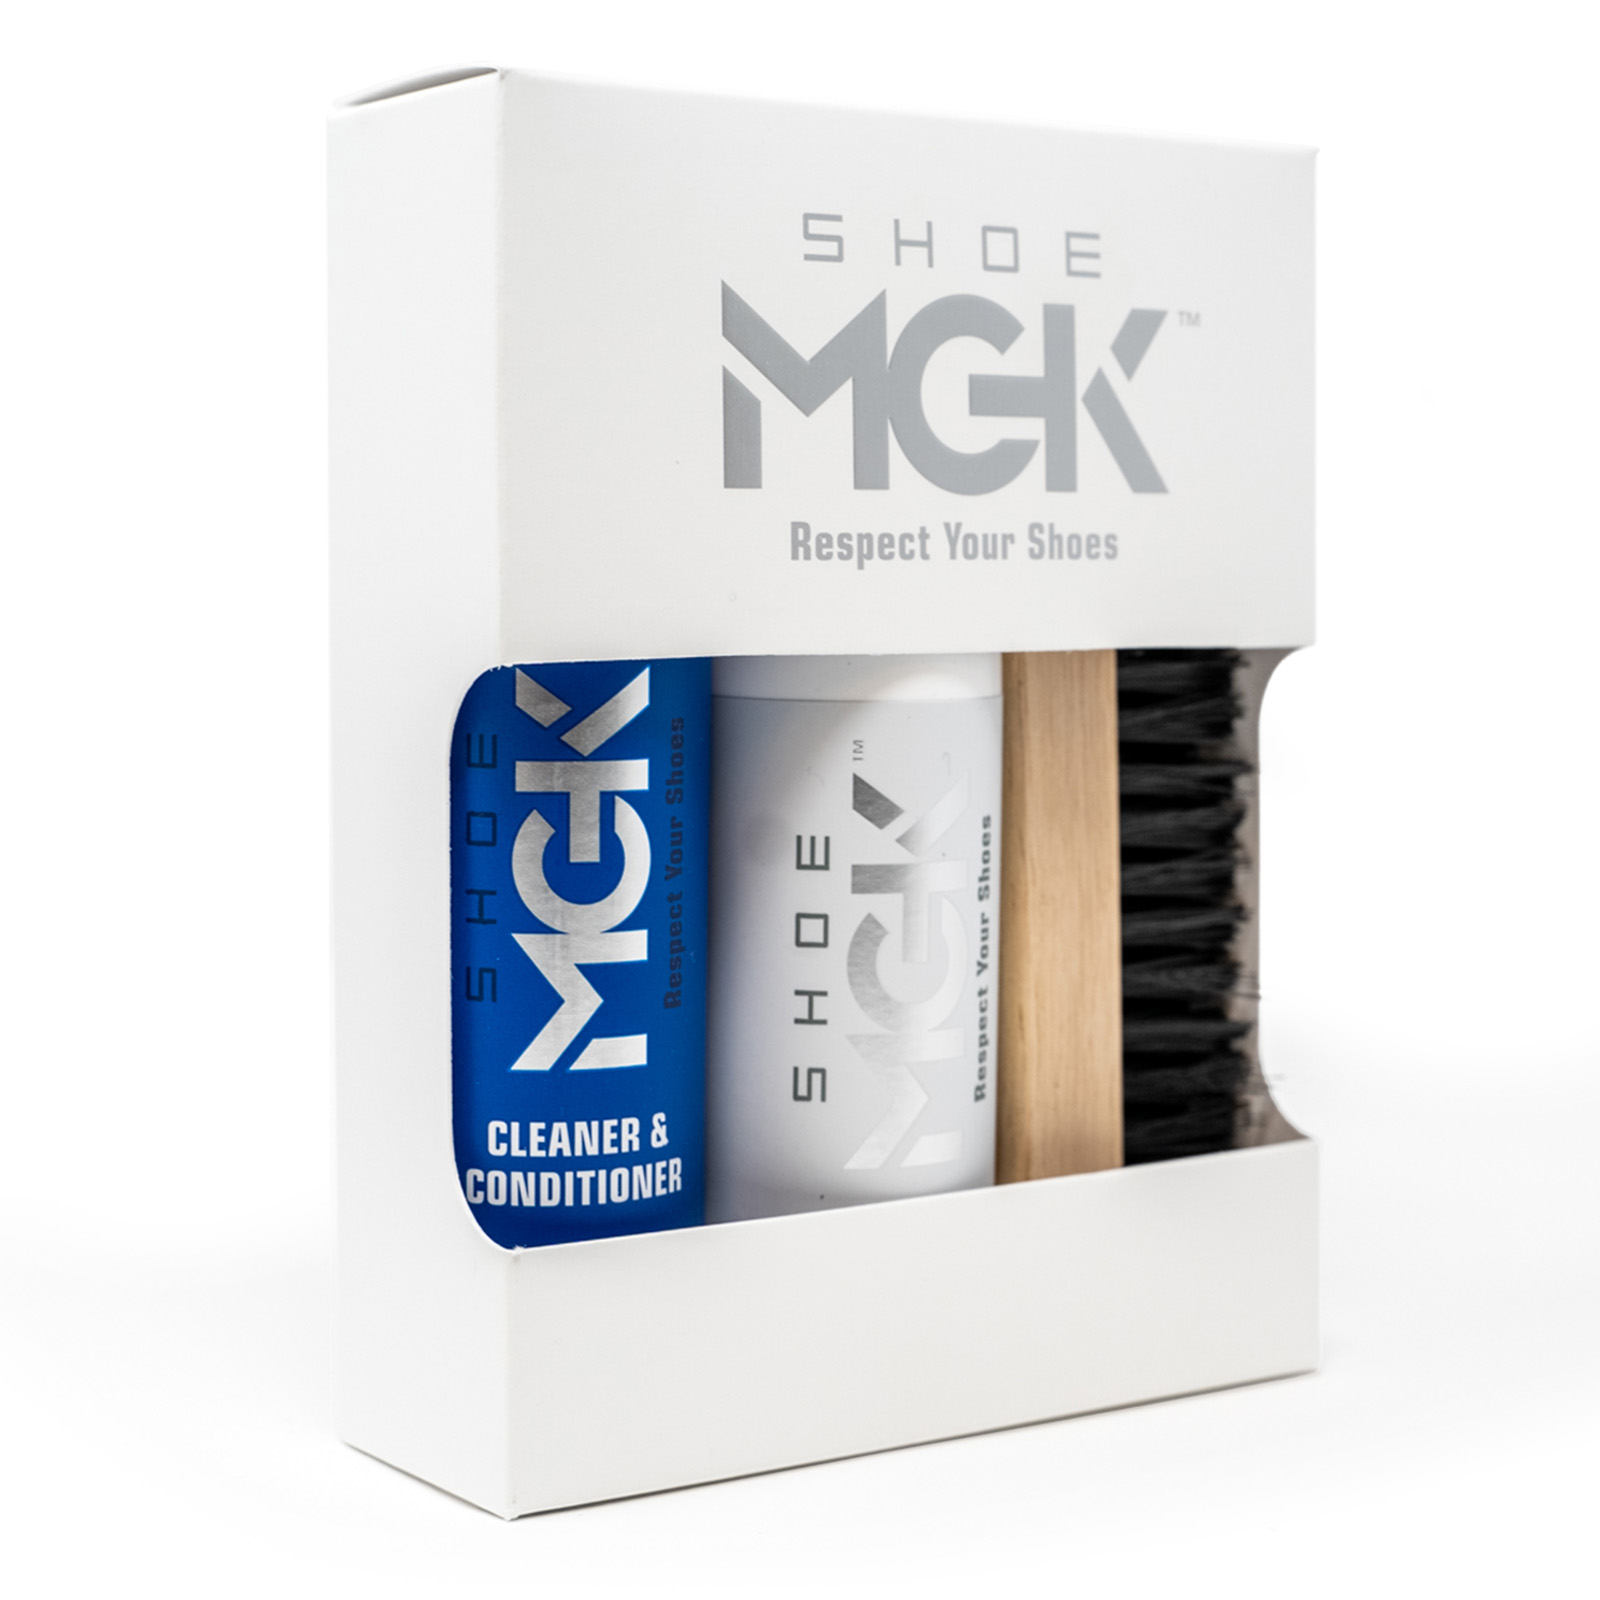 Shoe MGK Starter Shoe Cleaner Kit for White Shoes, Sneakers, Leather Shoes,  Suede Shoes, and more - Shoe Cleaner & Conditioner with Brush